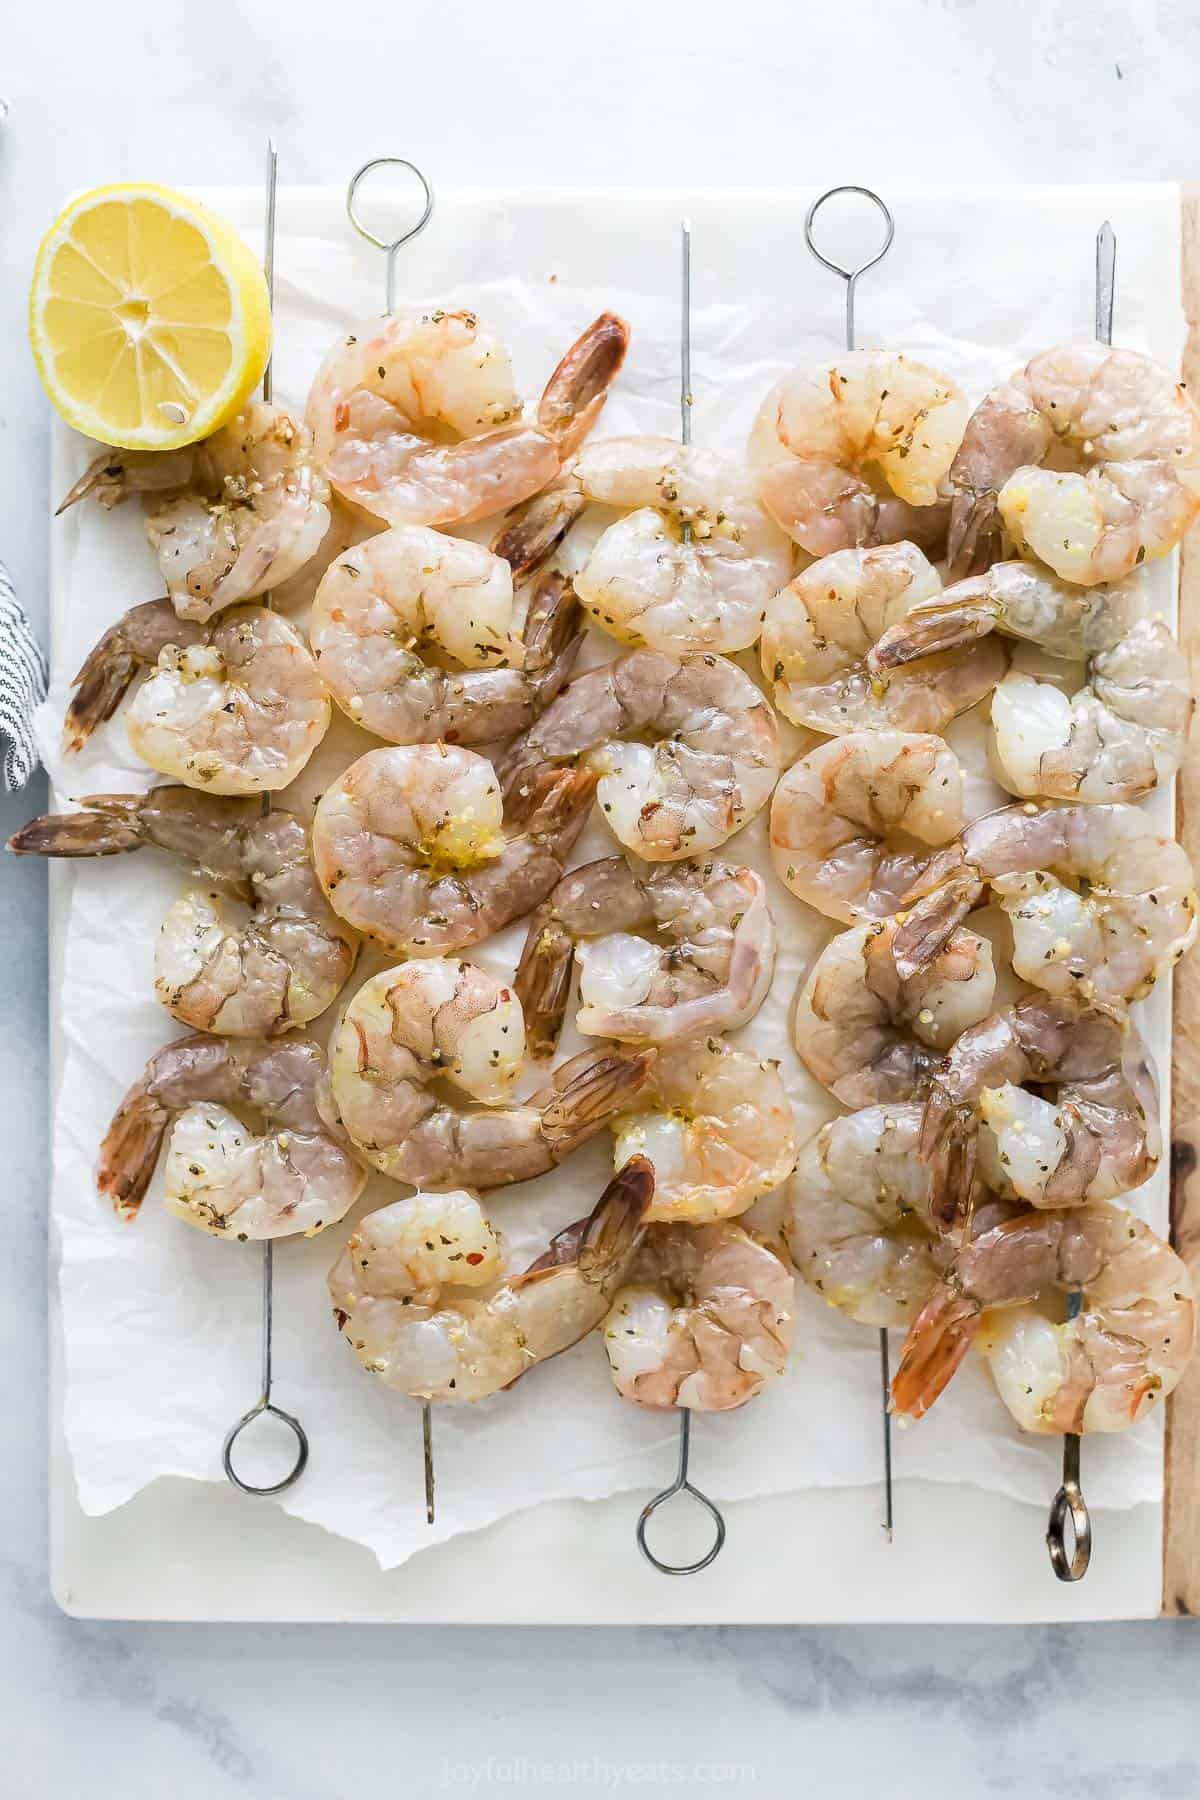 Seasoned raw shrimp threaded onto skewers and resting on top of a parchment-lined cutting board